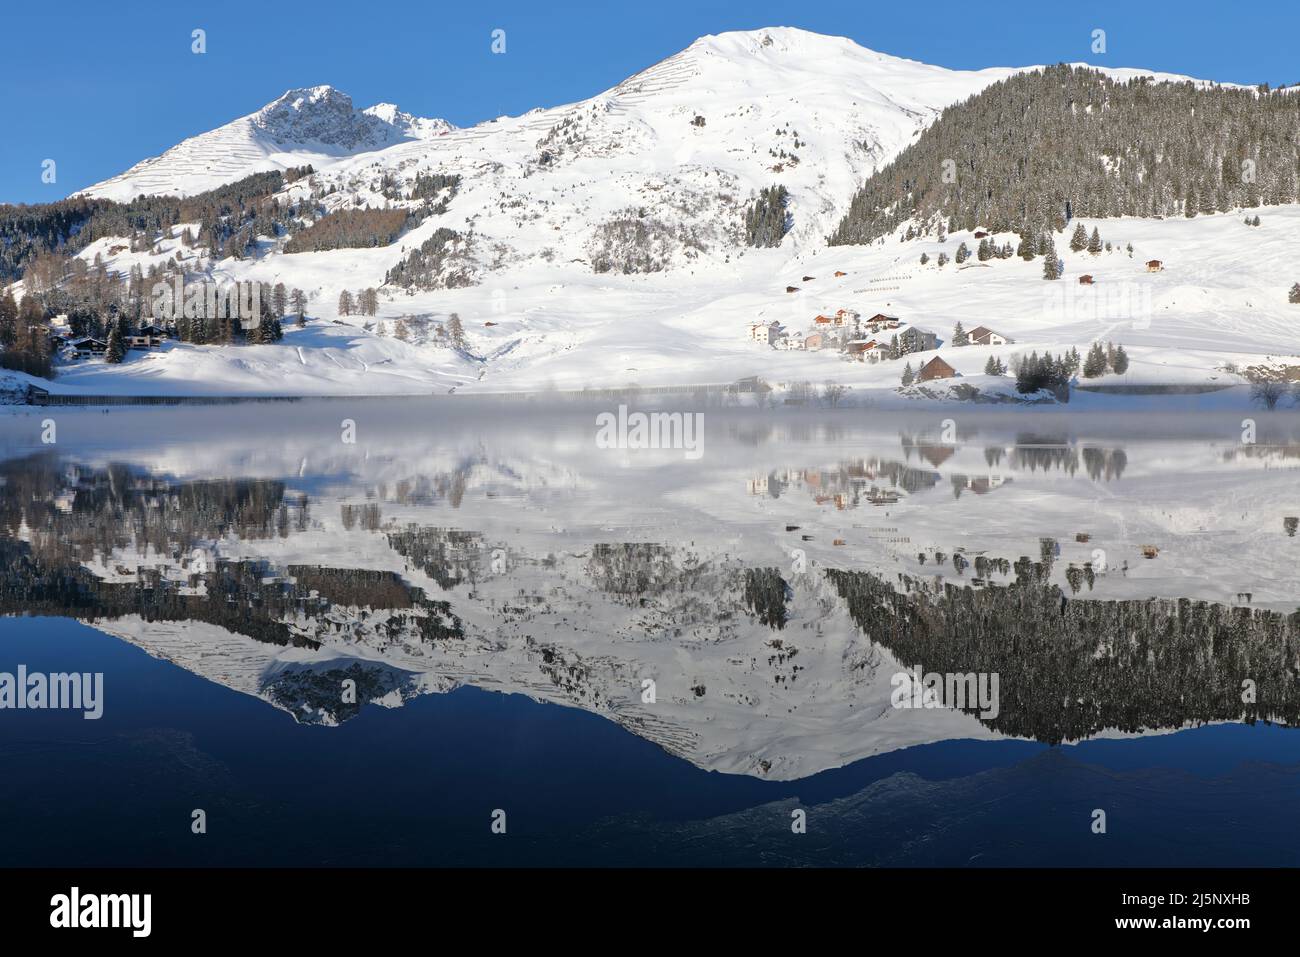 Panoramic view of beautiful white winter wonderland scenery in the Alps with snowy mountain summits reflecting in crystal clear mountain lake on a col Stock Photo